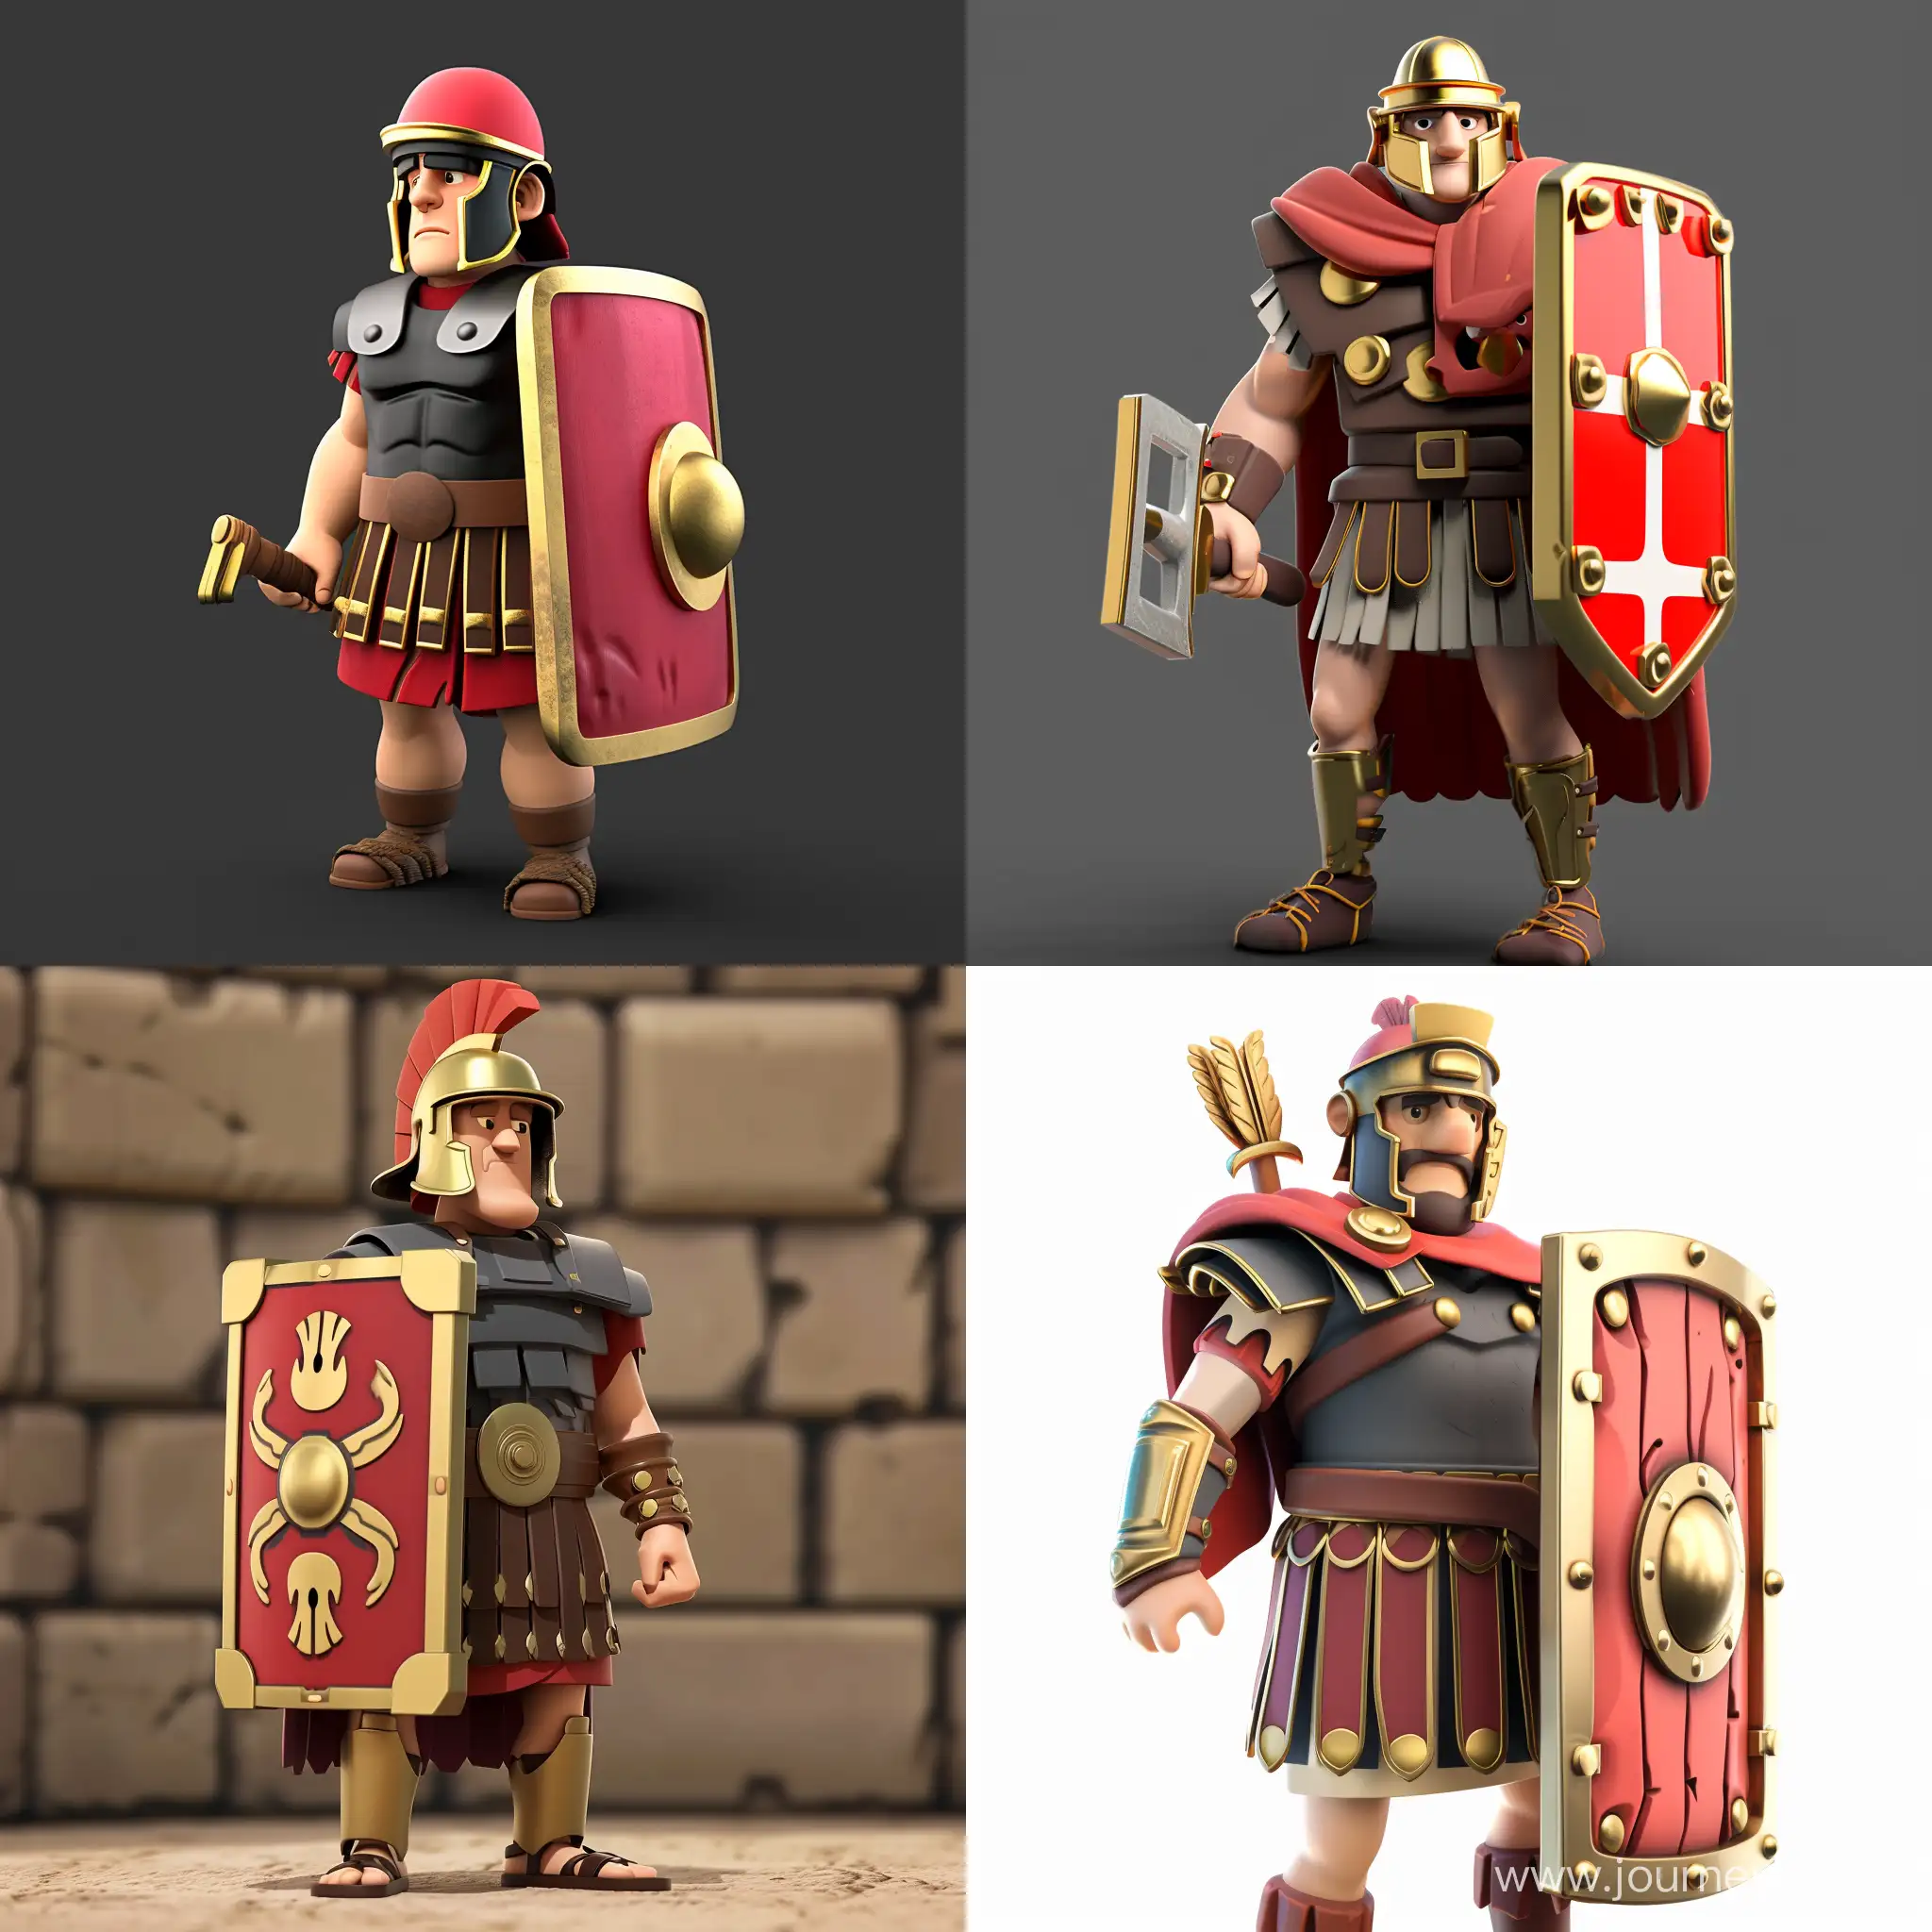 Roman-Legionary-with-Rectangular-Shield-in-Clash-Royale-Style